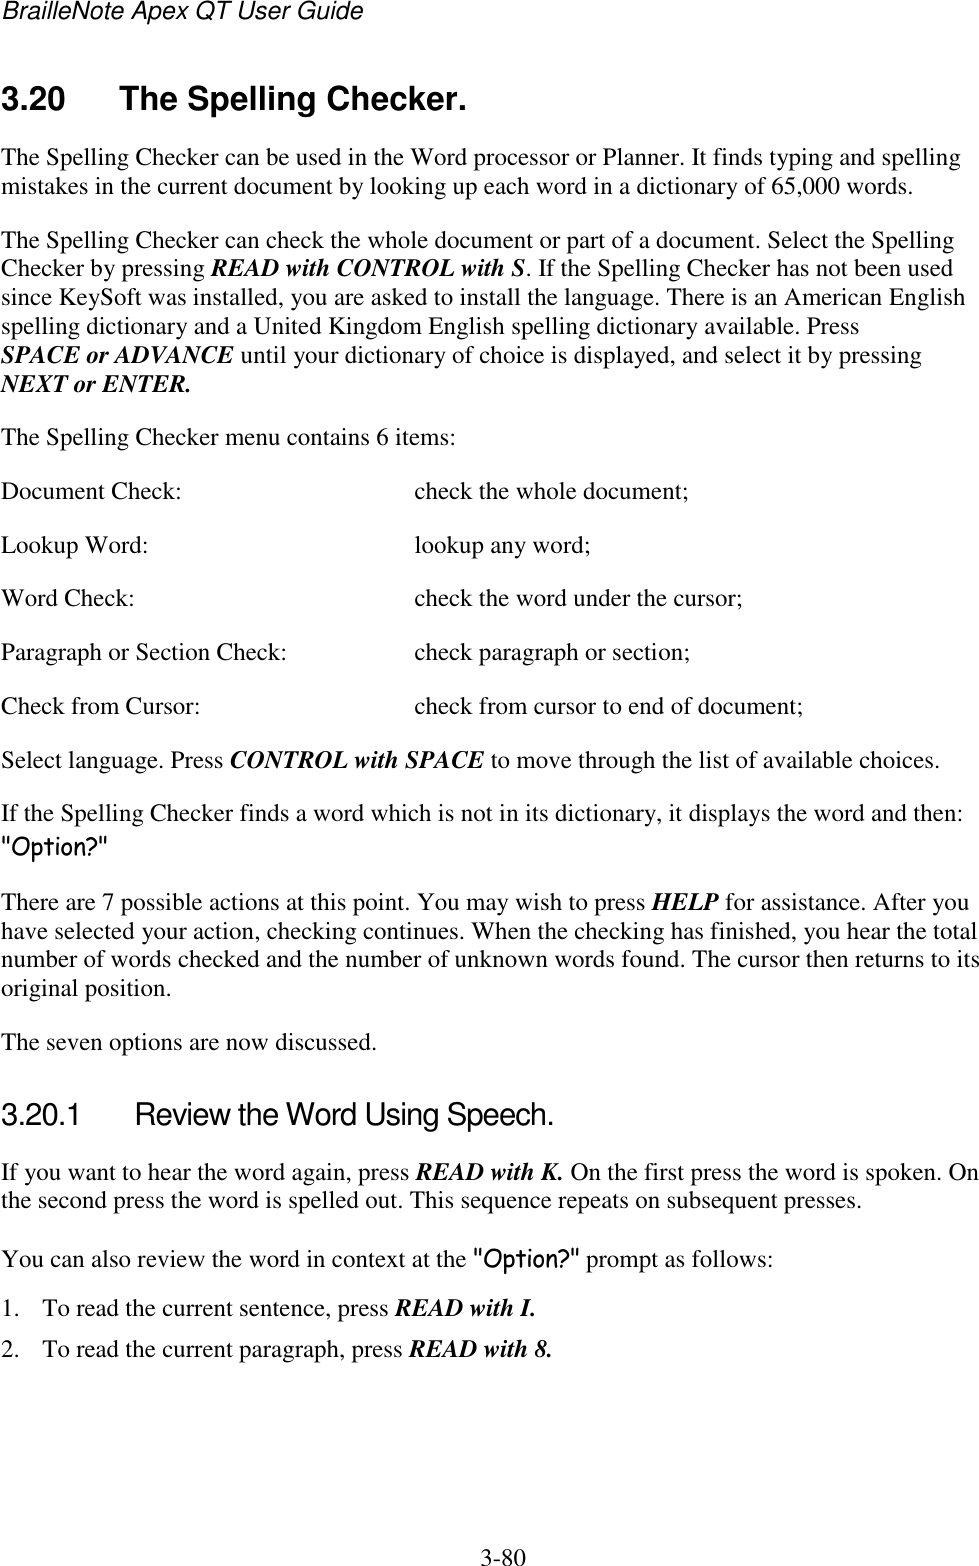 BrailleNote Apex QT User Guide  3-80   3.20  The Spelling Checker. The Spelling Checker can be used in the Word processor or Planner. It finds typing and spelling mistakes in the current document by looking up each word in a dictionary of 65,000 words. The Spelling Checker can check the whole document or part of a document. Select the Spelling Checker by pressing READ with CONTROL with S. If the Spelling Checker has not been used since KeySoft was installed, you are asked to install the language. There is an American English spelling dictionary and a United Kingdom English spelling dictionary available. Press SPACE or ADVANCE until your dictionary of choice is displayed, and select it by pressing NEXT or ENTER. The Spelling Checker menu contains 6 items: Document Check:  check the whole document; Lookup Word:  lookup any word; Word Check:  check the word under the cursor; Paragraph or Section Check:  check paragraph or section; Check from Cursor:  check from cursor to end of document; Select language. Press CONTROL with SPACE to move through the list of available choices.  If the Spelling Checker finds a word which is not in its dictionary, it displays the word and then: &quot;Option?&quot; There are 7 possible actions at this point. You may wish to press HELP for assistance. After you have selected your action, checking continues. When the checking has finished, you hear the total number of words checked and the number of unknown words found. The cursor then returns to its original position. The seven options are now discussed.  3.20.1  Review the Word Using Speech. If you want to hear the word again, press READ with K. On the first press the word is spoken. On the second press the word is spelled out. This sequence repeats on subsequent presses. You can also review the word in context at the &quot;Option?&quot; prompt as follows: 1. To read the current sentence, press READ with I. 2. To read the current paragraph, press READ with 8. 